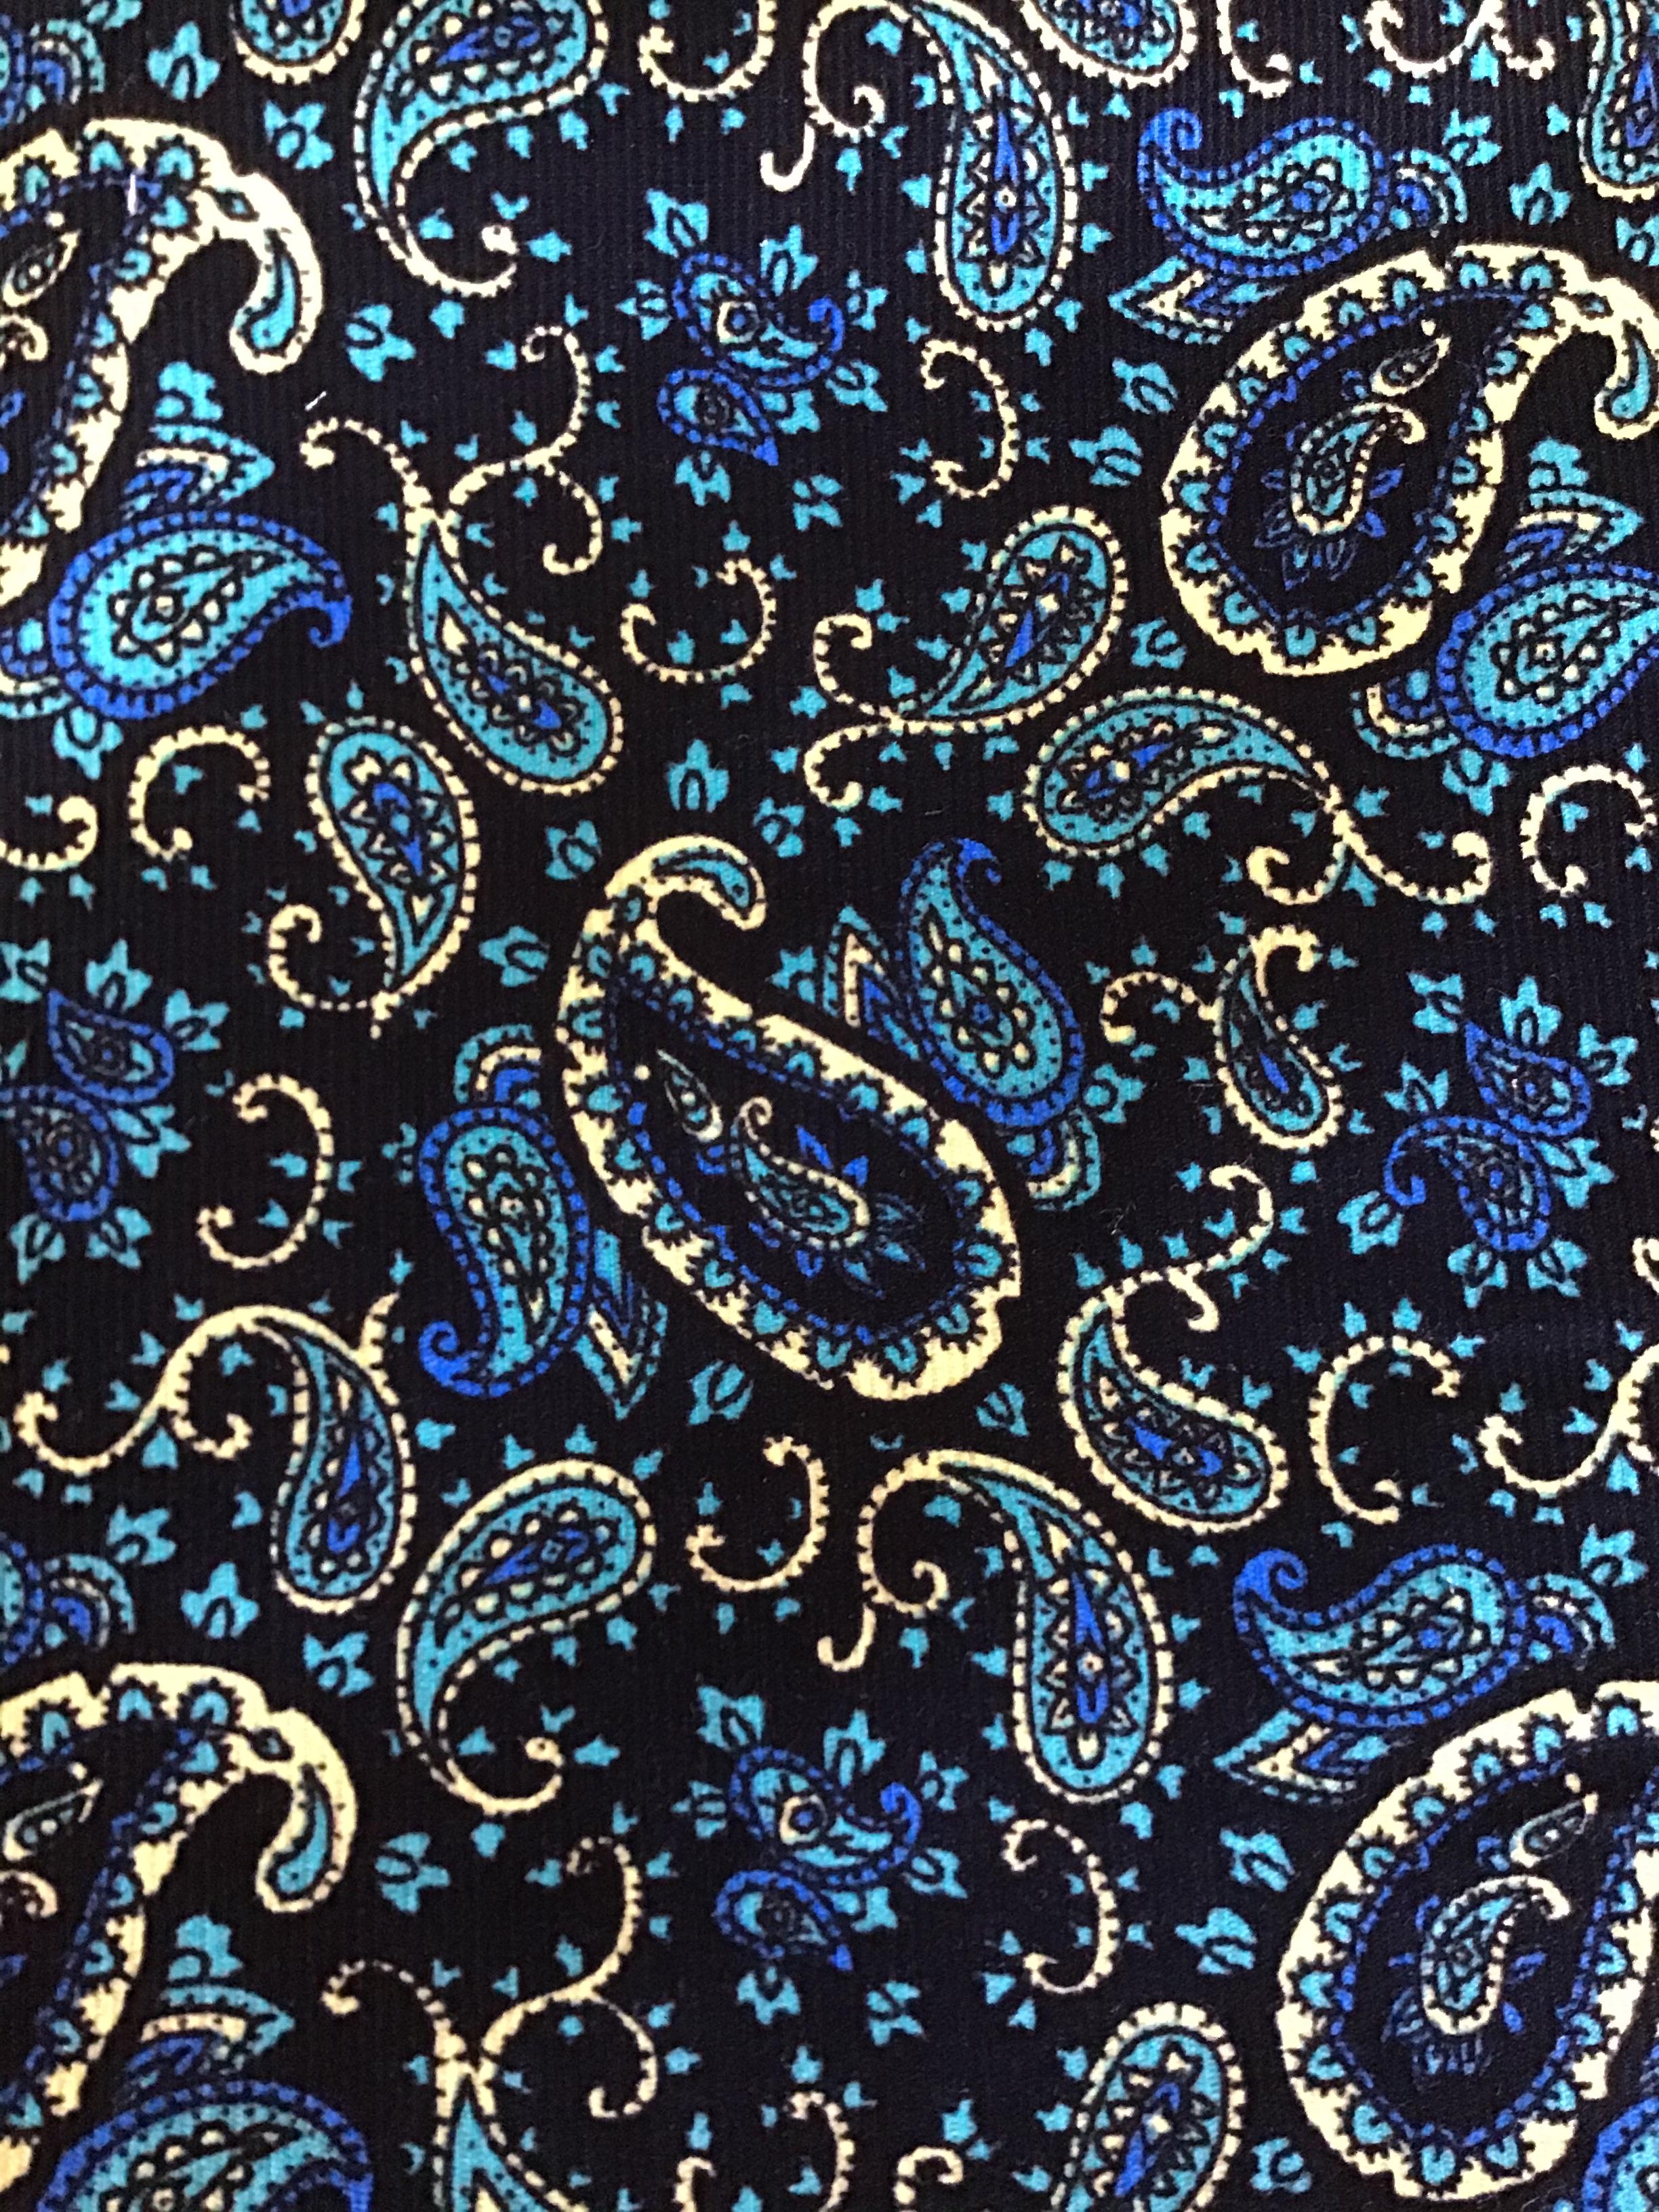 The Origin of the Paisley Pattern – The East India Company